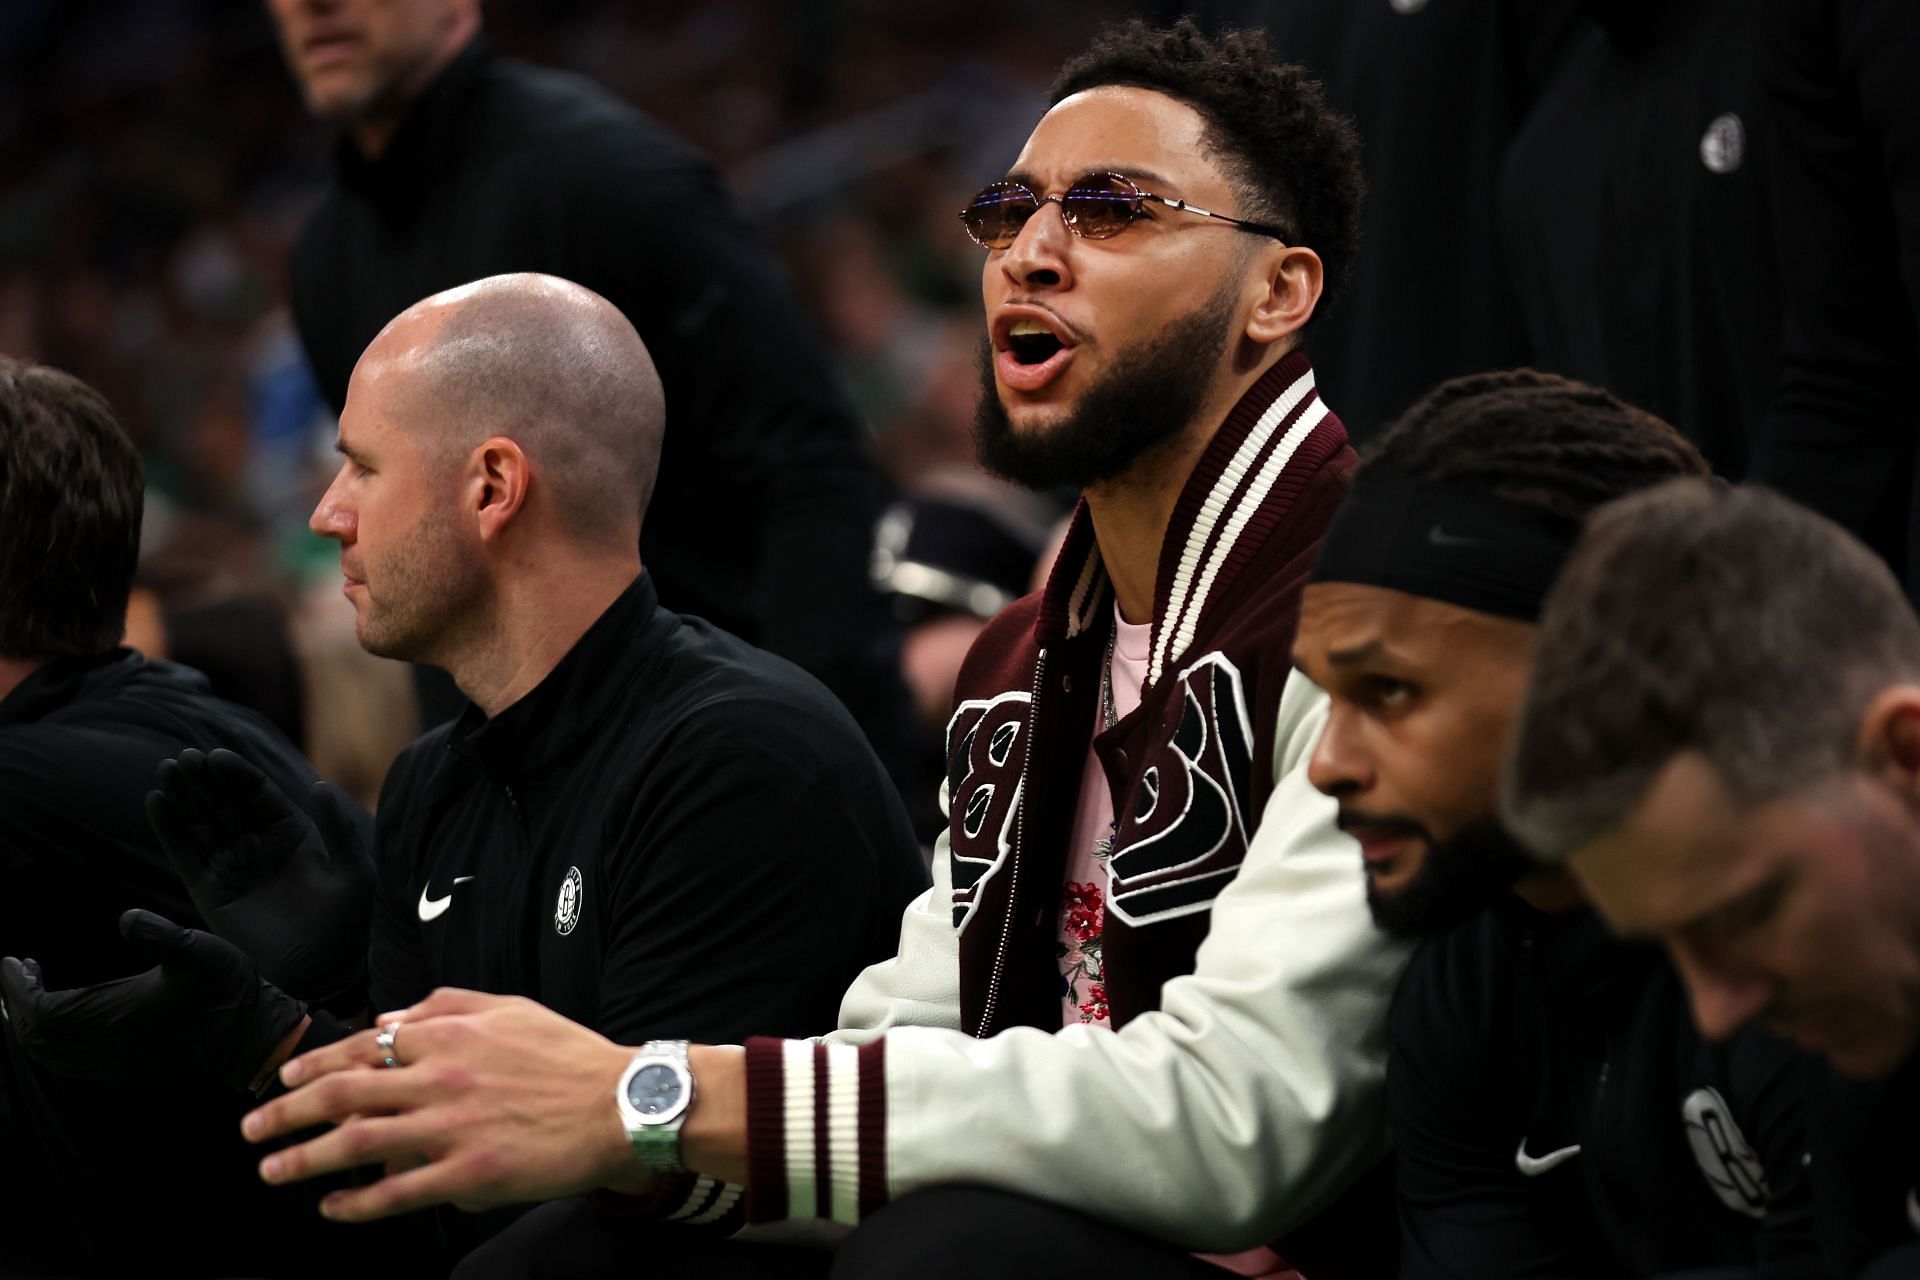 Ben Simmons reveals he has a new number on his jersey with the Brooklyn Nets.